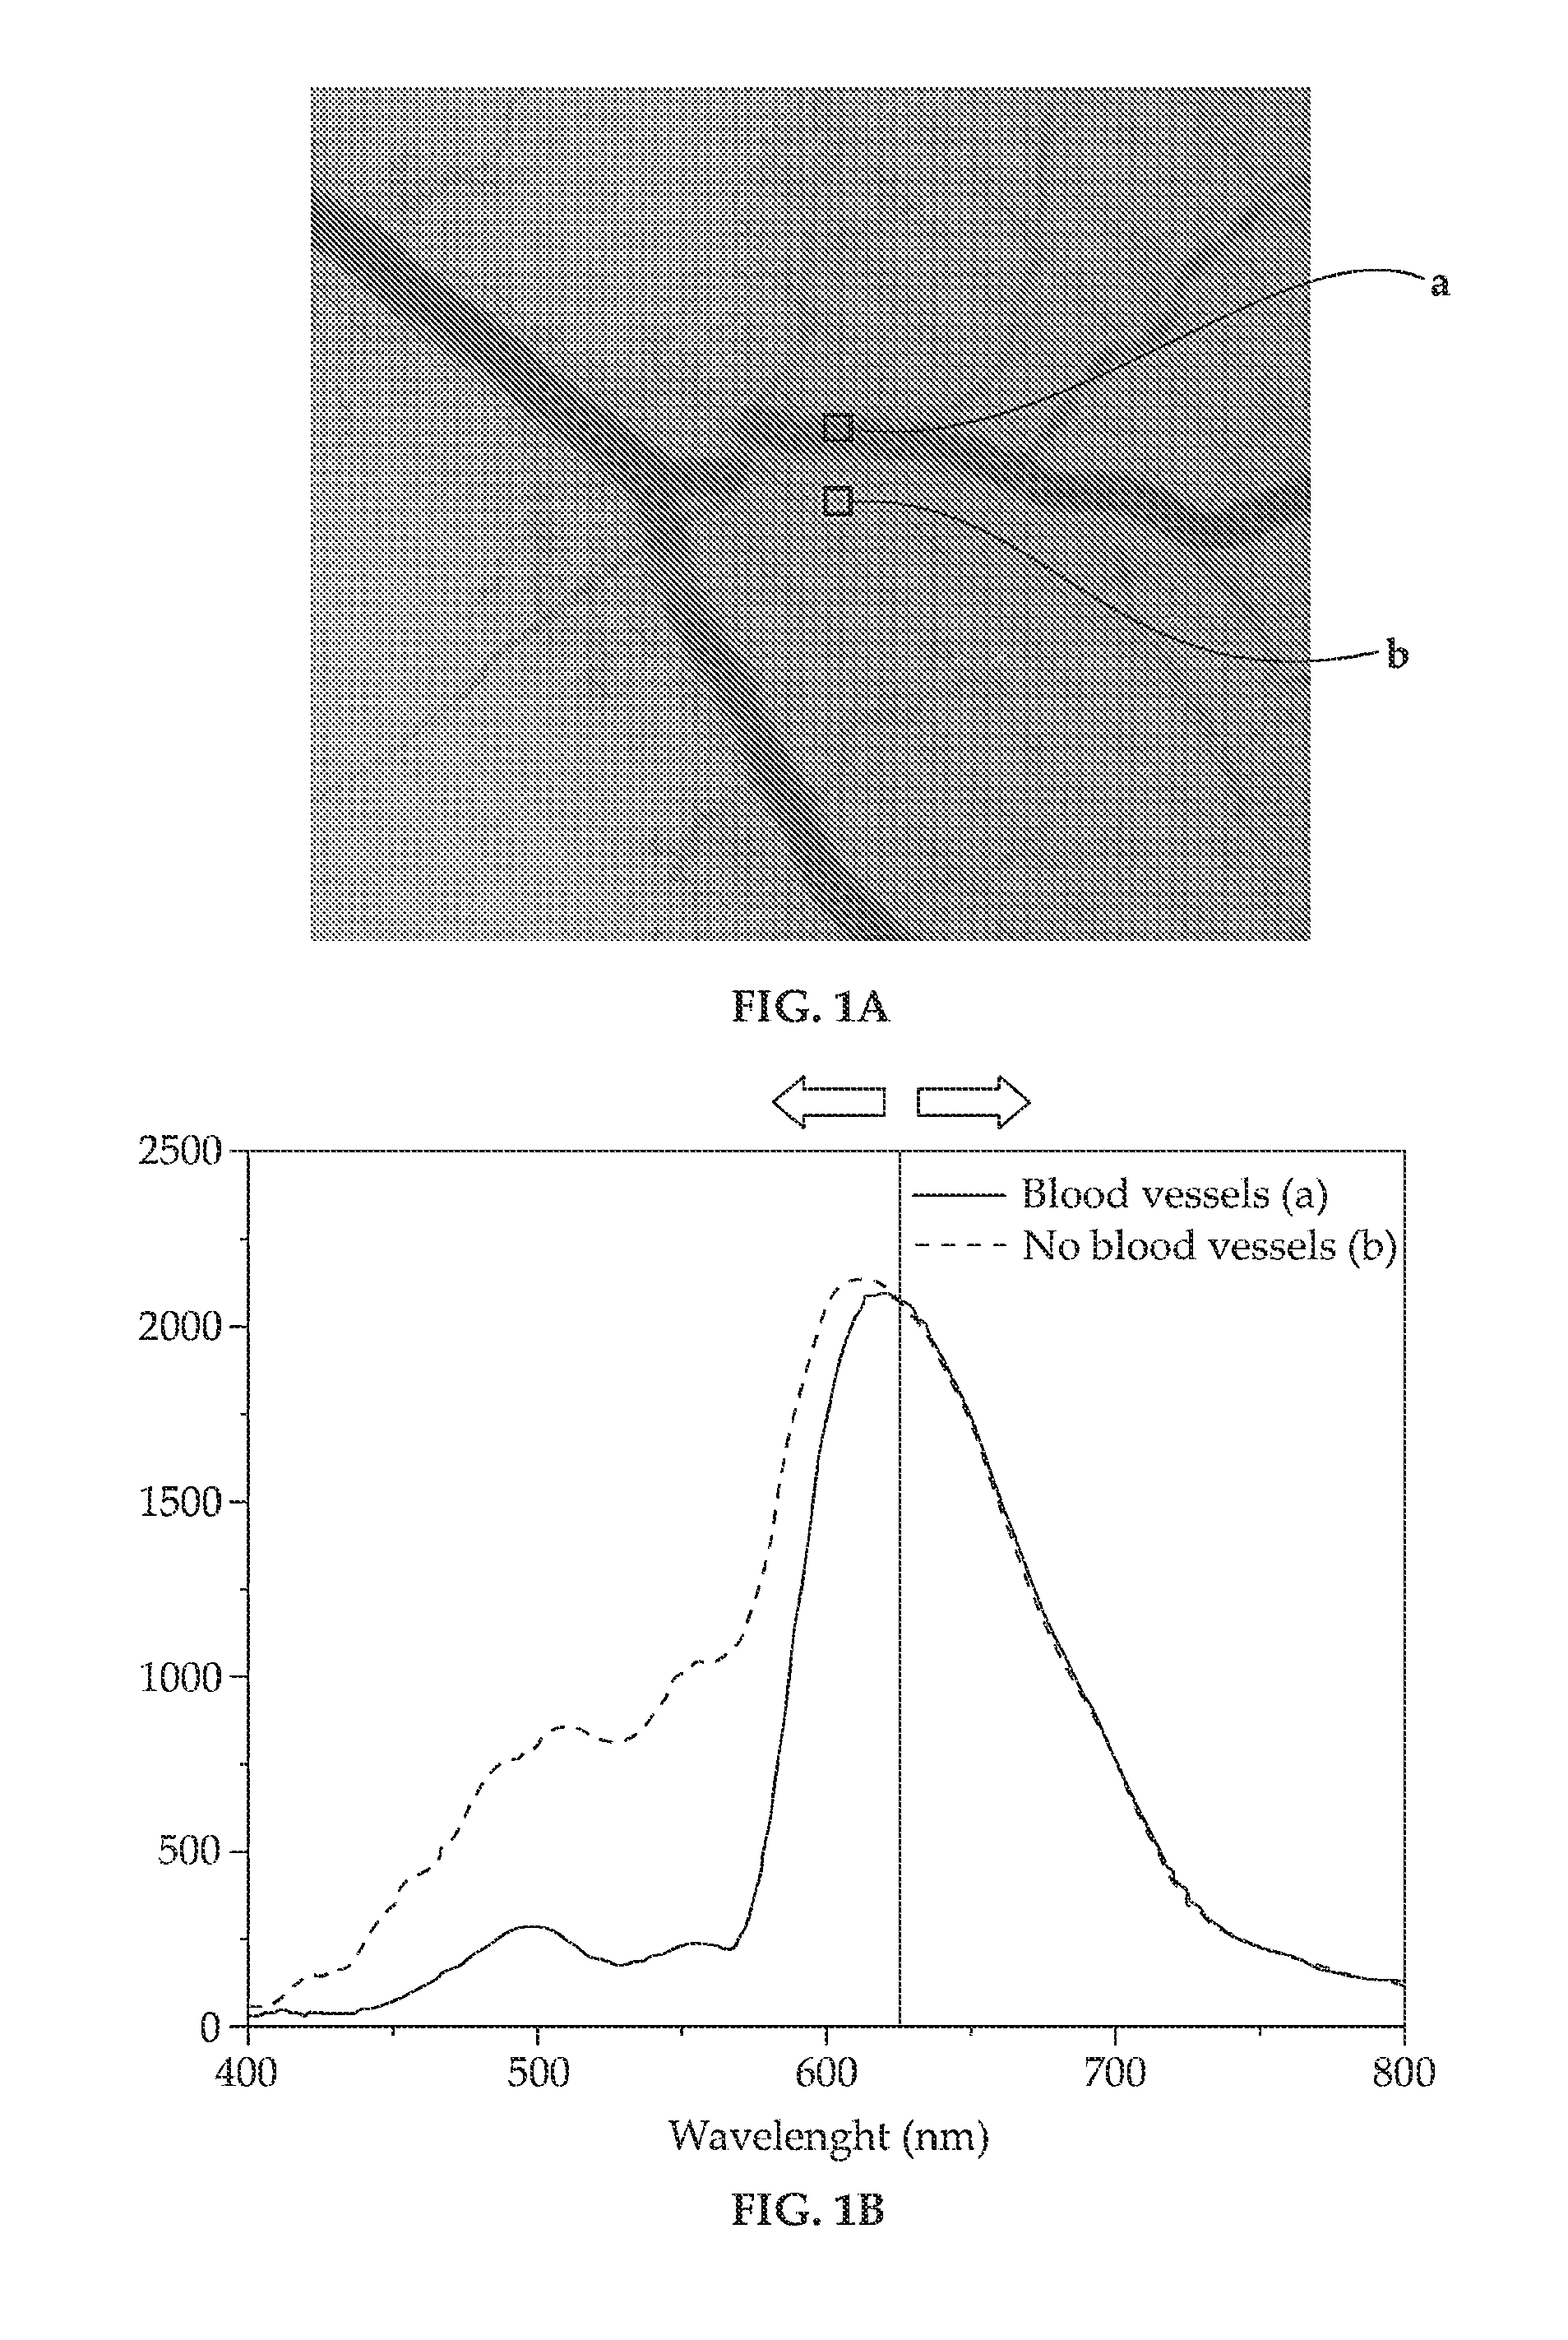 Methods and devices suitable for imaging blood-containing tissue